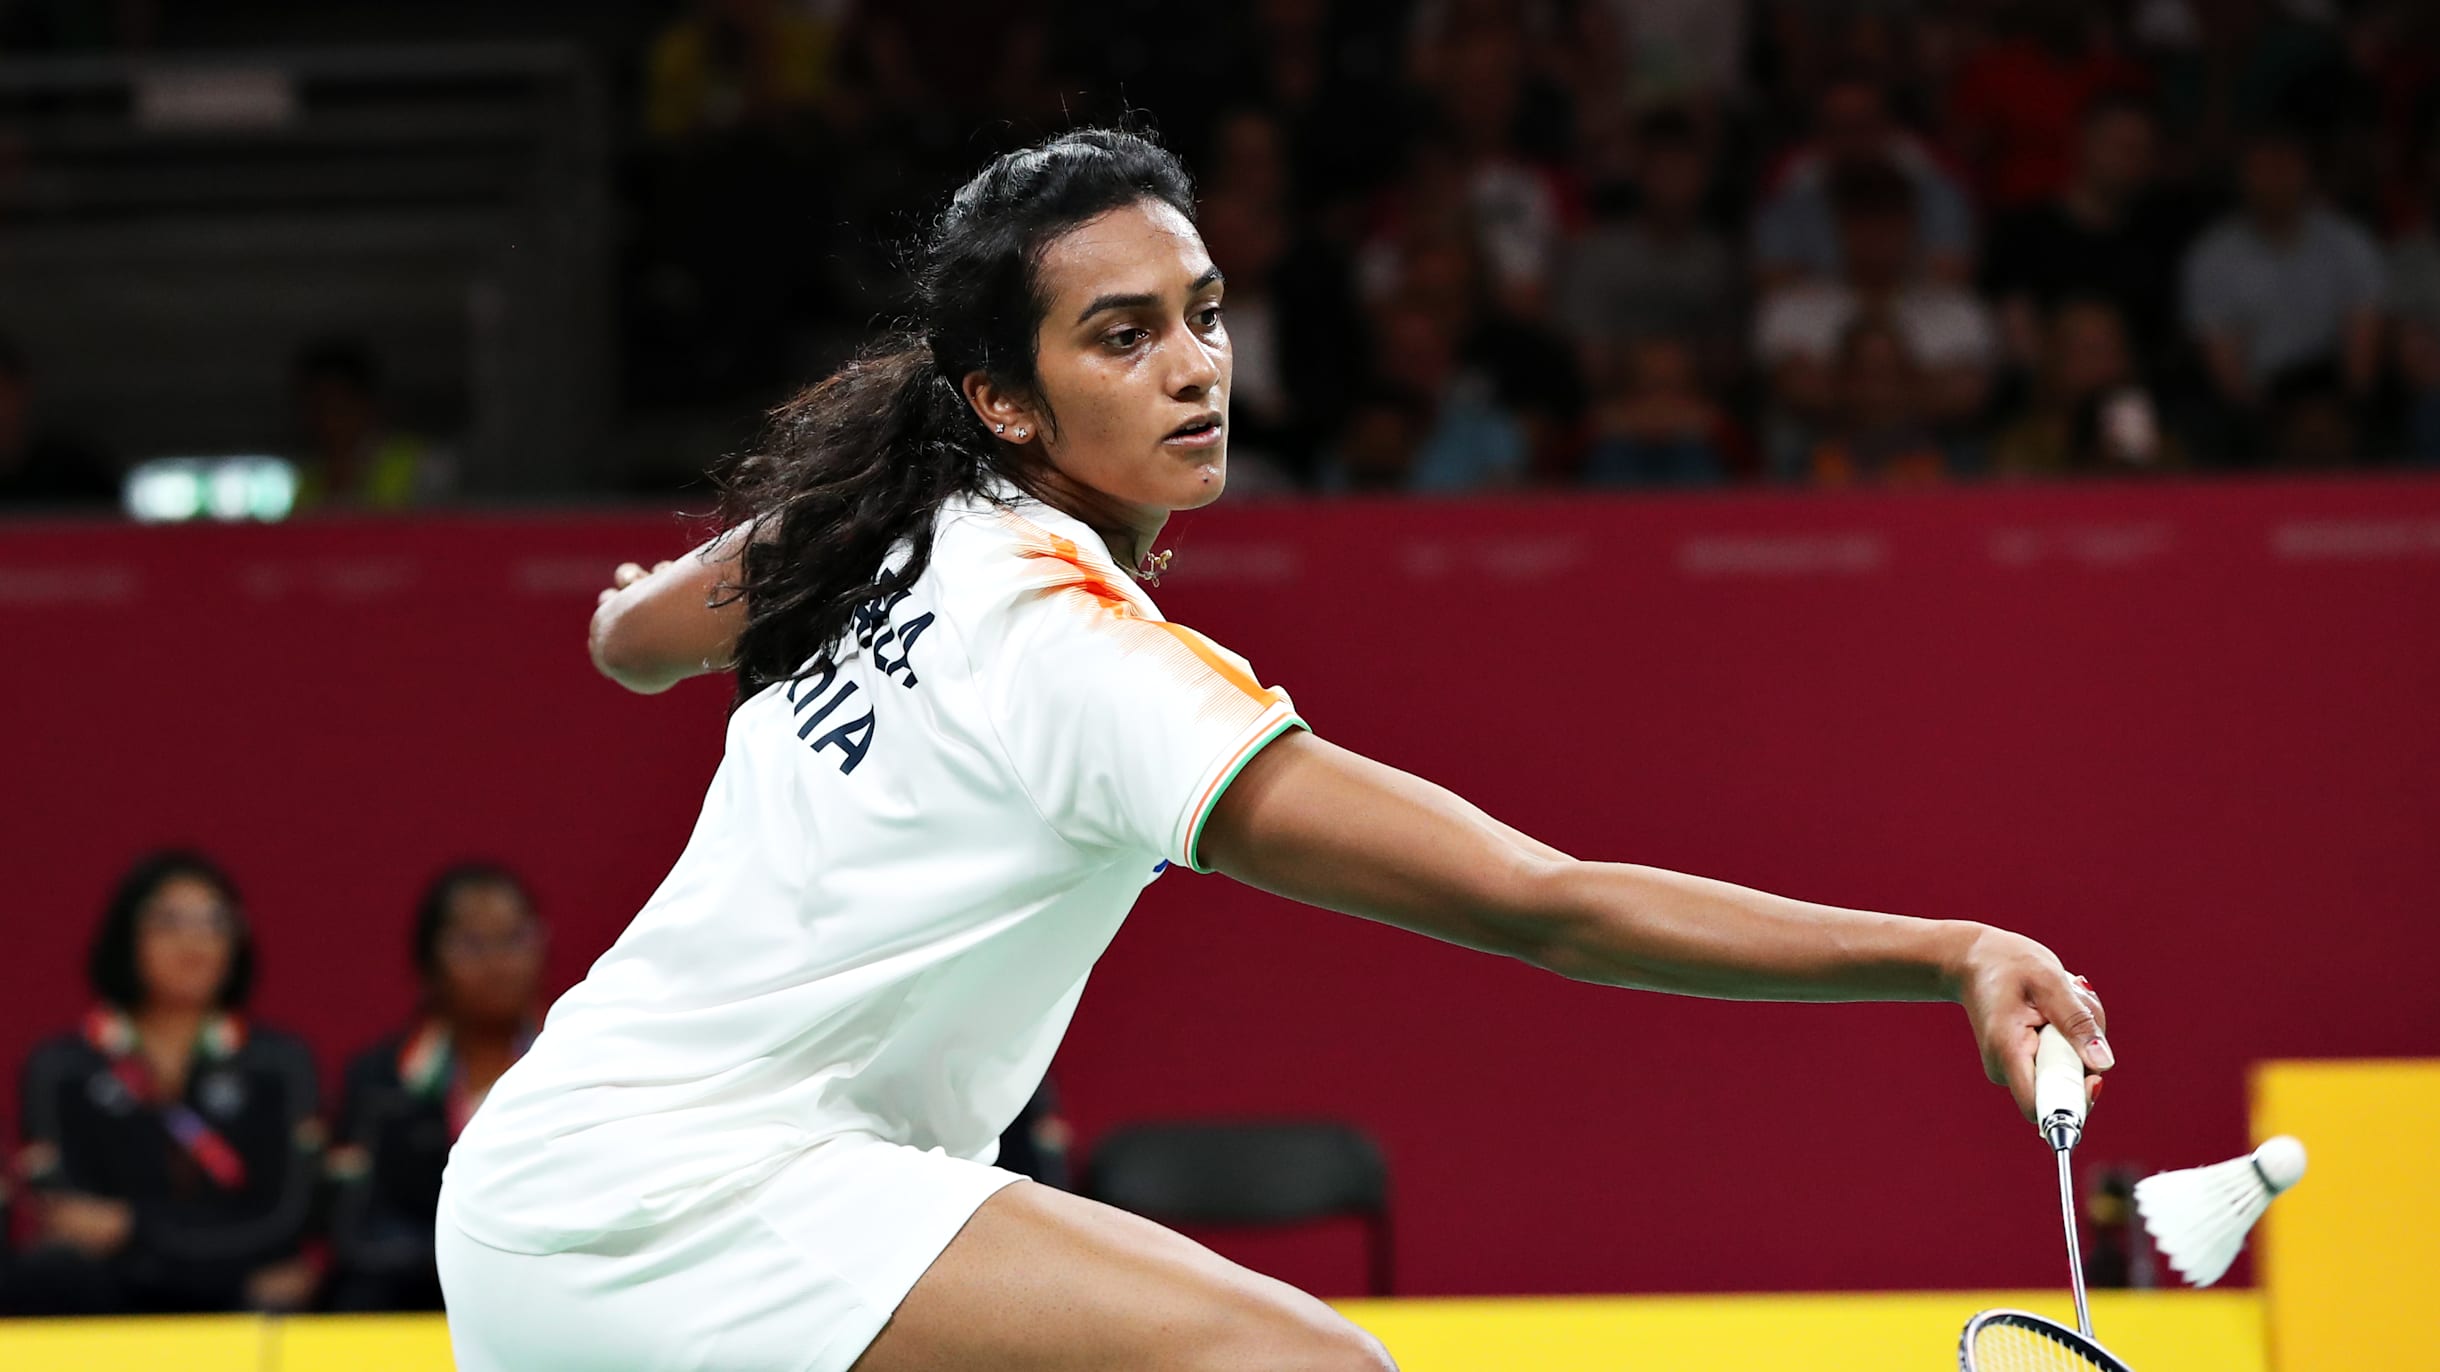 India mixed team badminton assured of medal at Commonwealth Games 2022